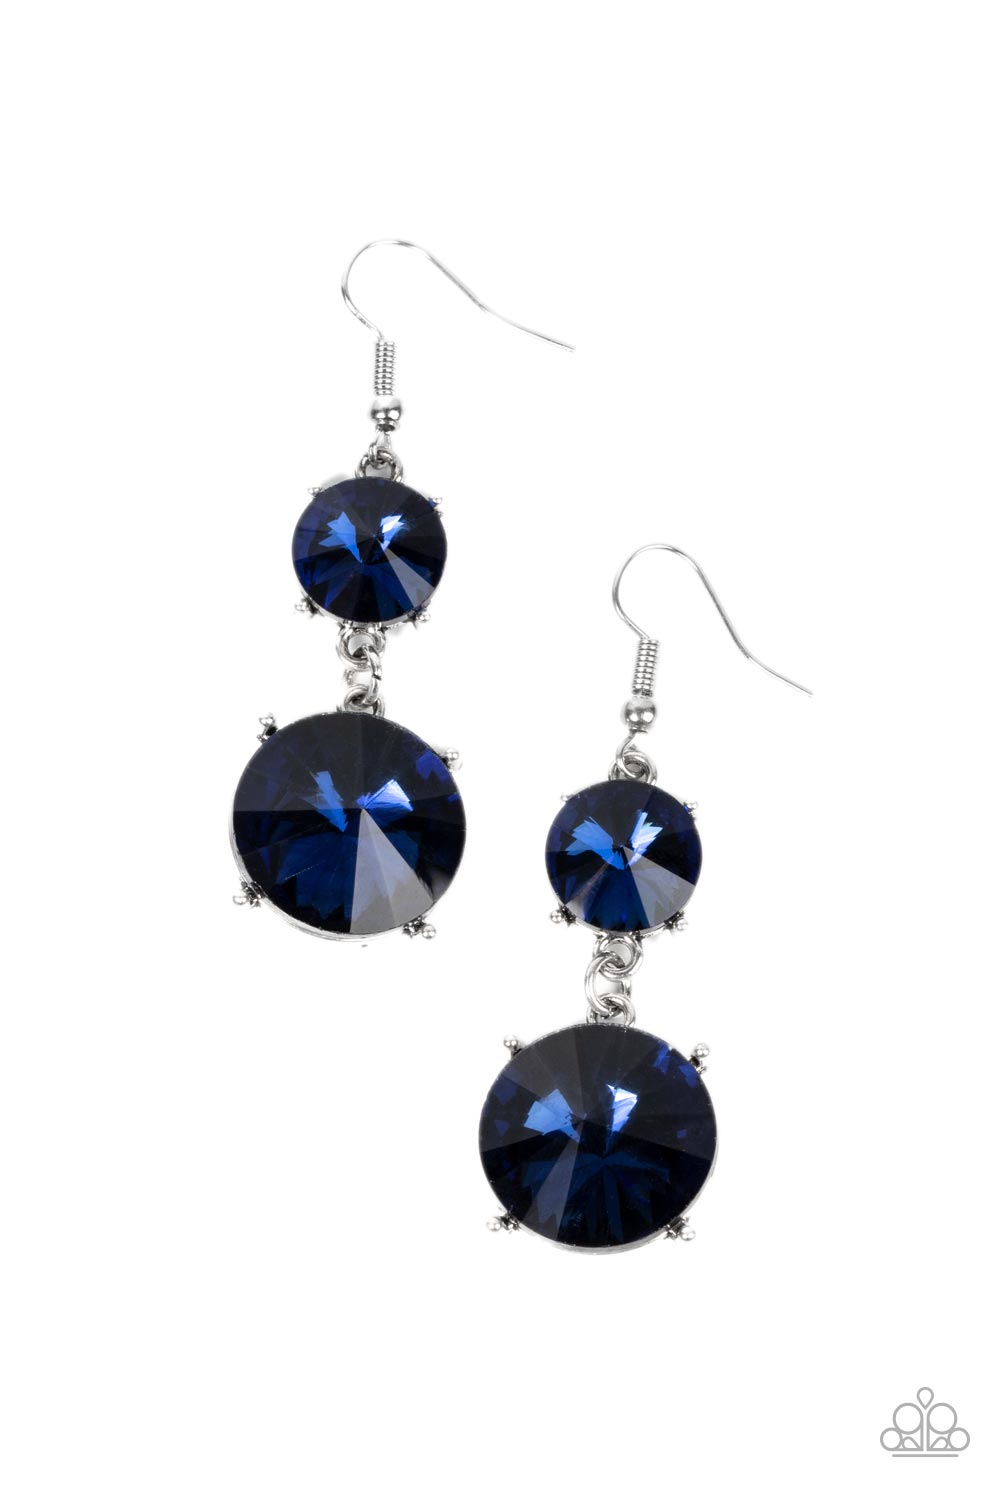 Sizzling Showcase Blue Earring - Paparazzi Accessories  Featuring pronged silver fittings, two oversized blue rhinestones dramatically link into a bold smoldering lure as they drip dazzlingly from the ear. Earring attaches to a standard fishhook fitting.  Sold as one pair of earrings.